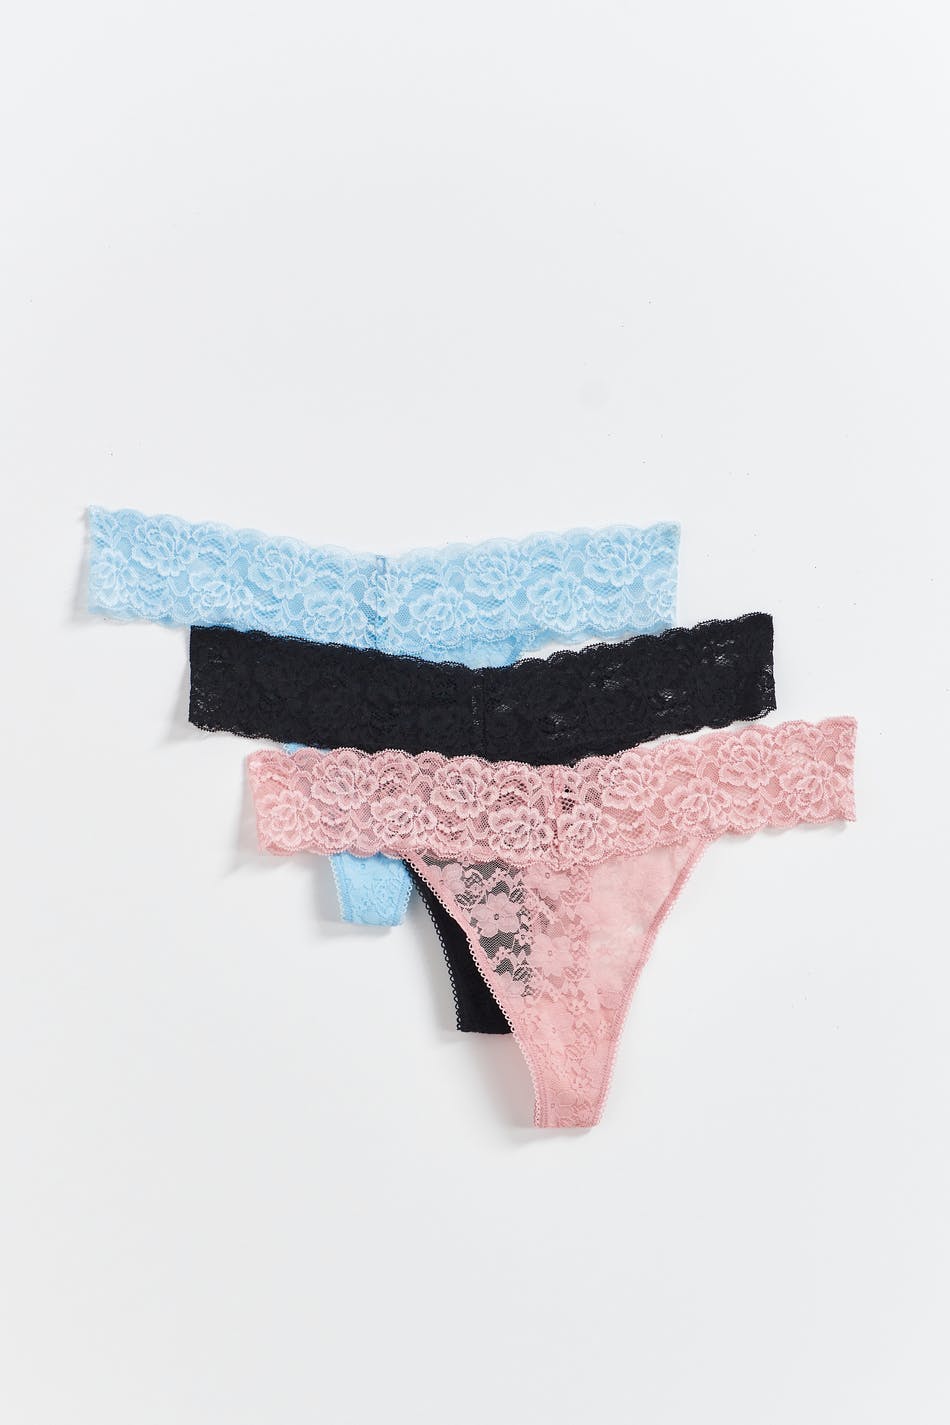 George Women's 3 Pack Lace Thong 